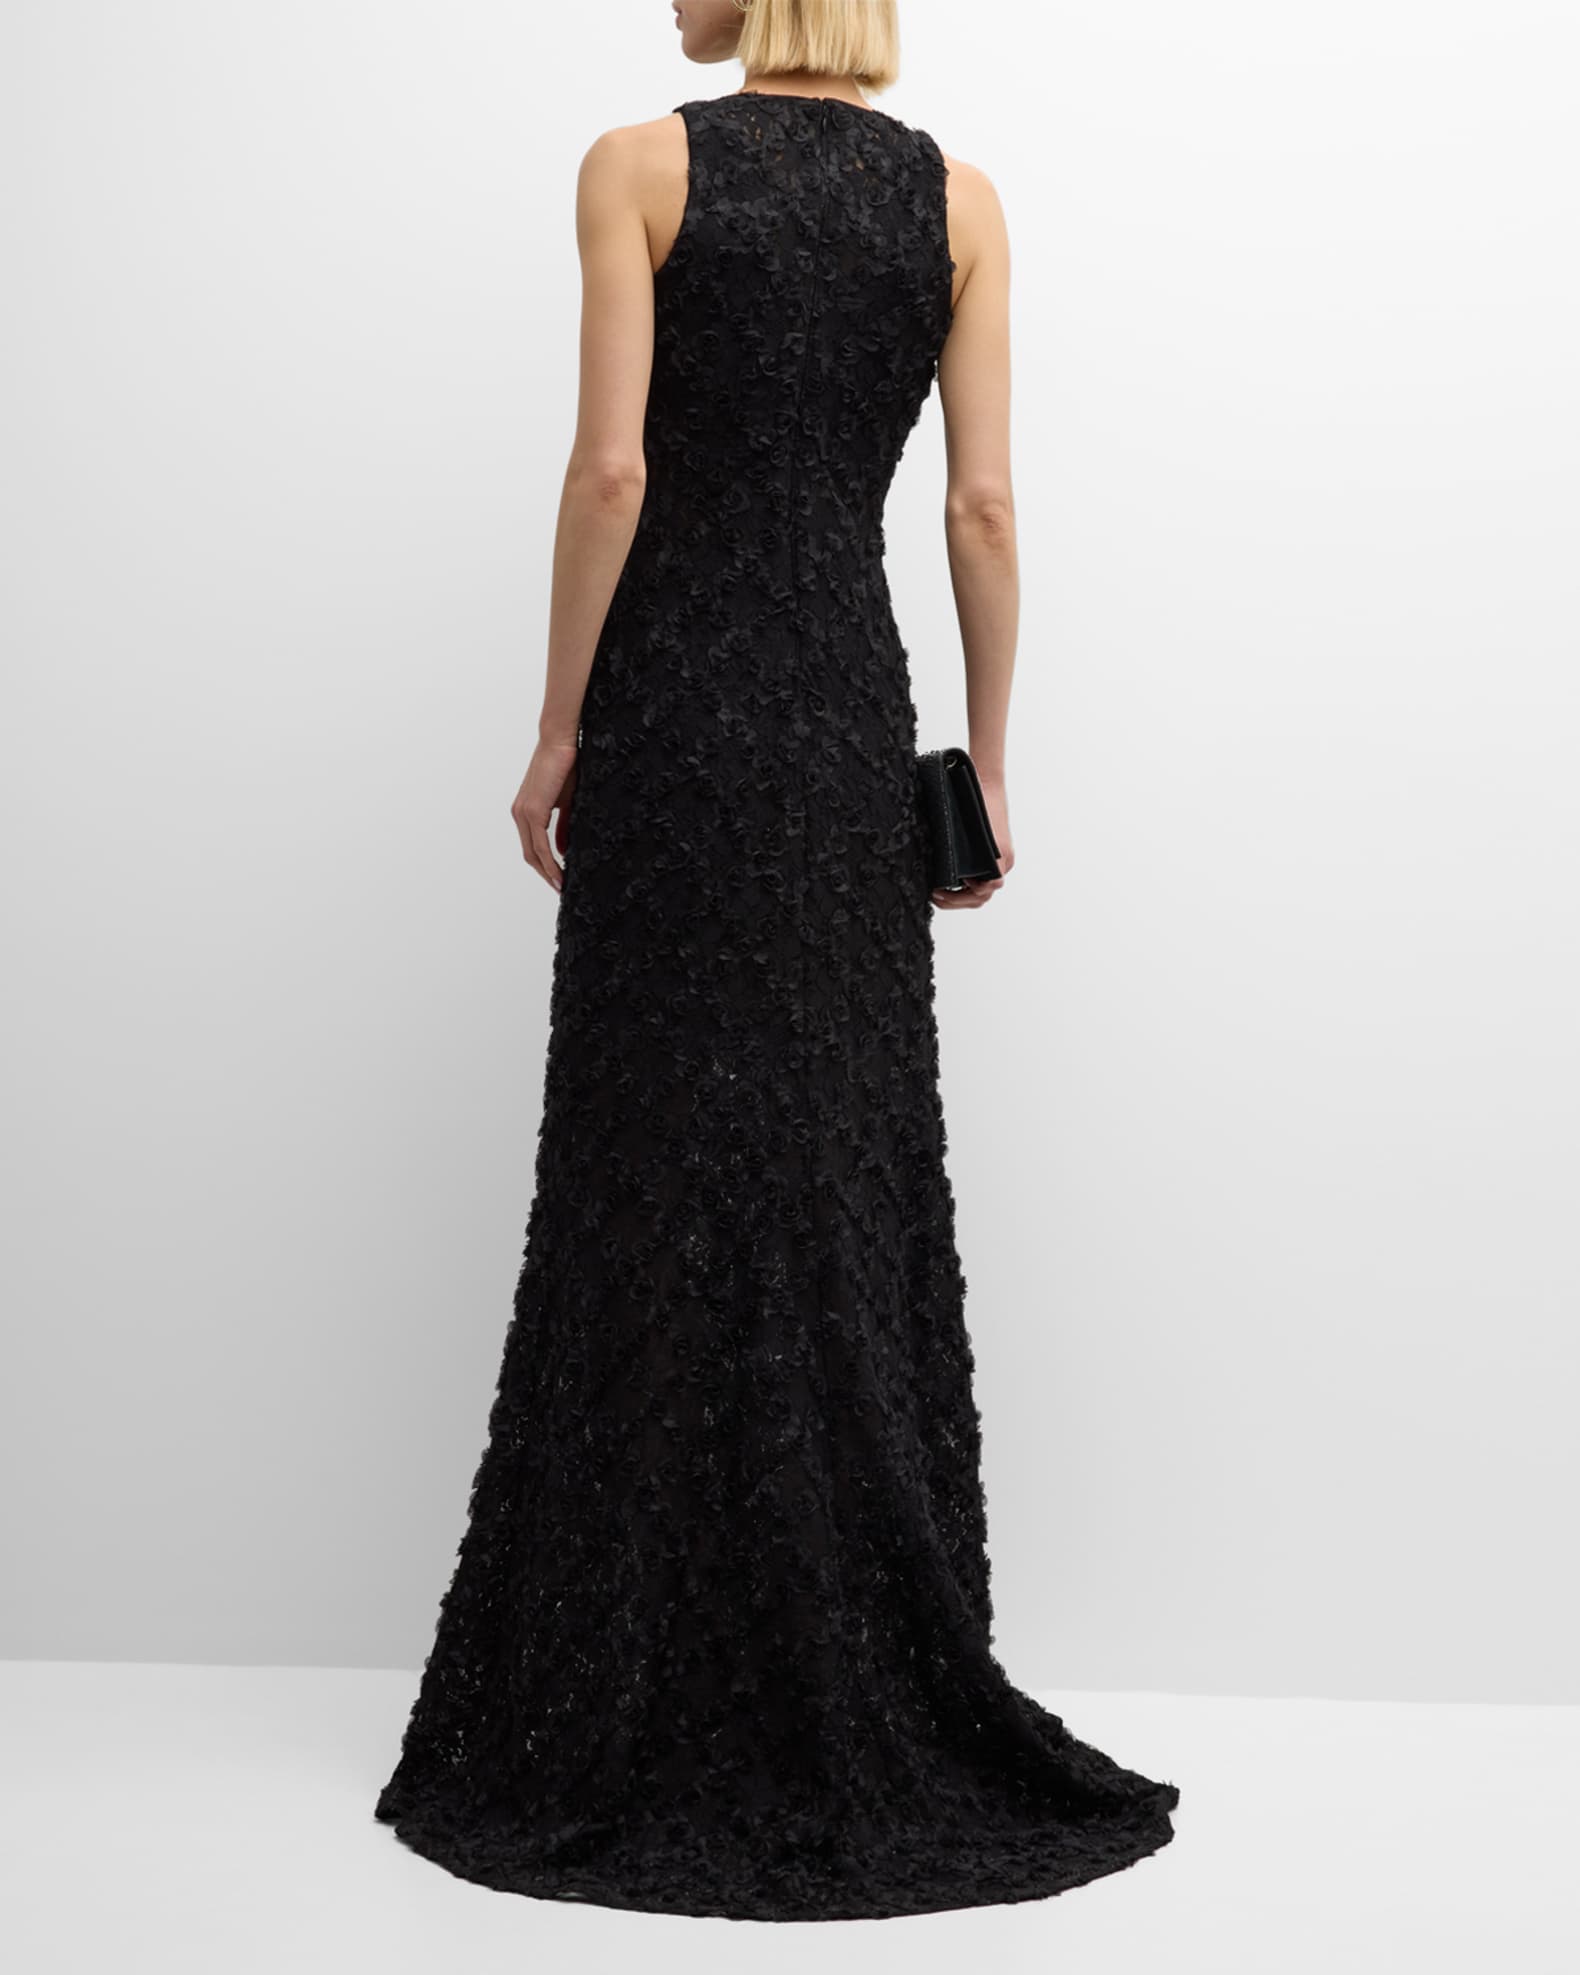 SHO Sleeveless Floral Applique Lace Gown | Neiman Marcus